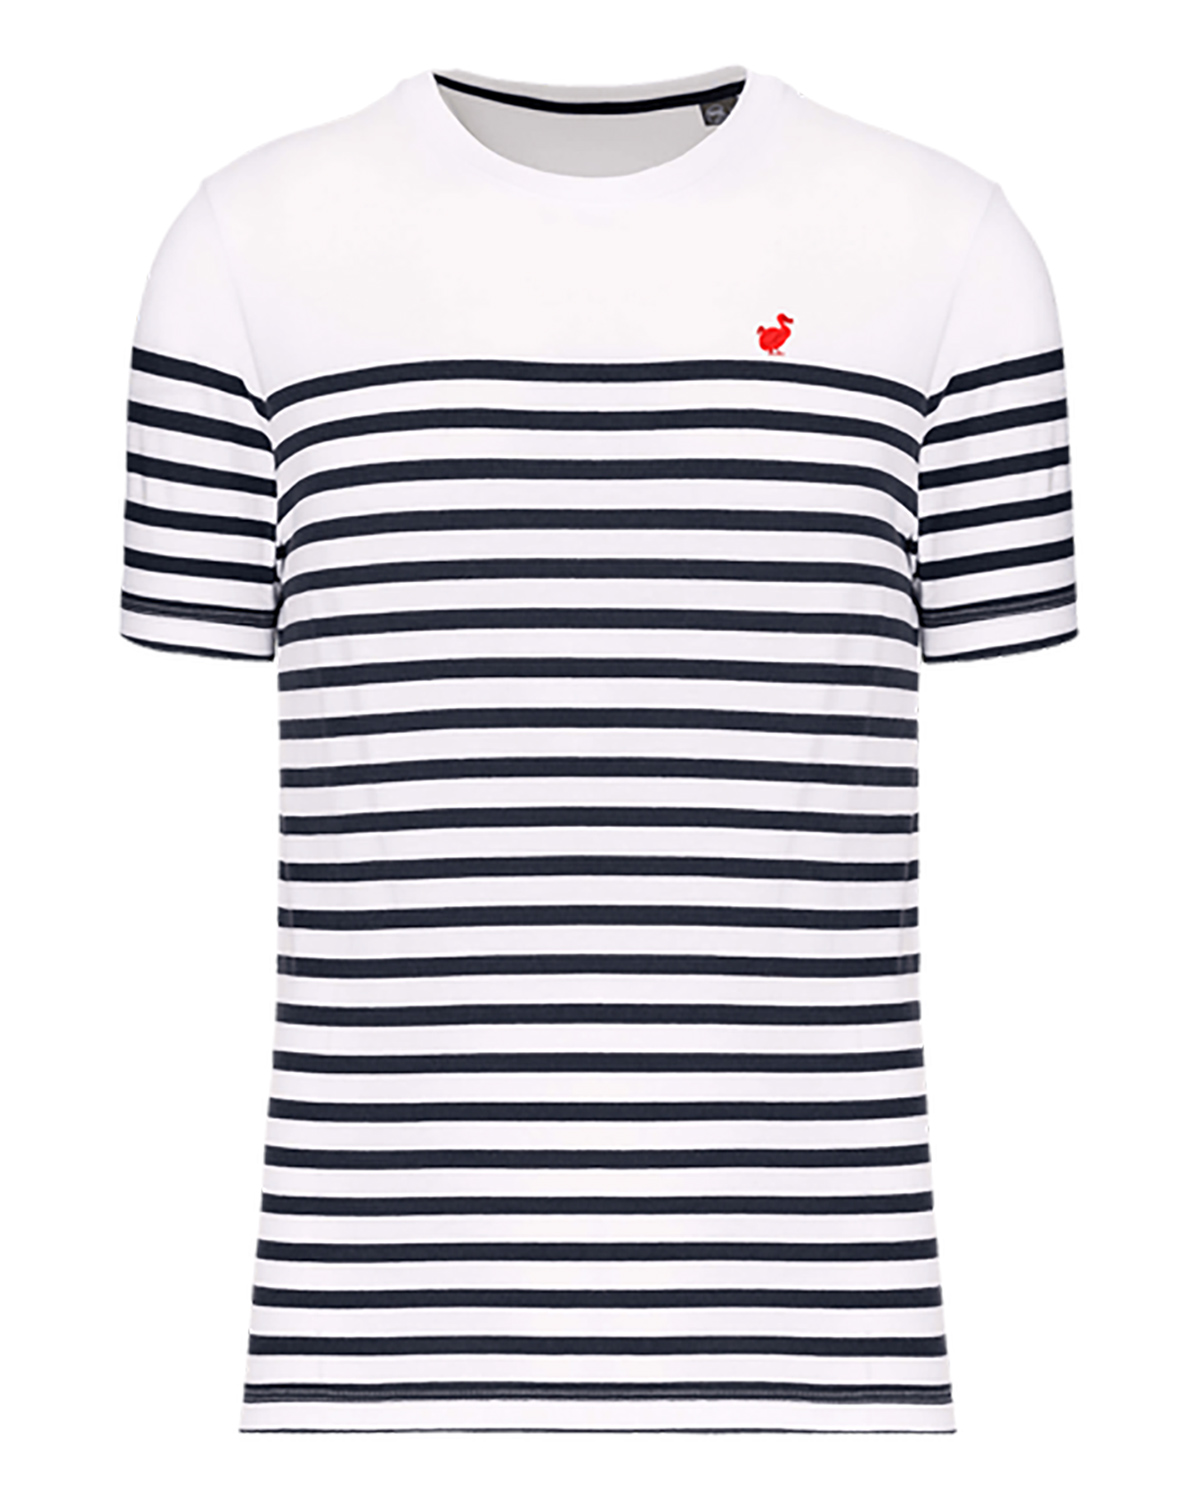 Kotomili-Mauritius-men's-embroided-dodo-sailor-striped-mariniere---red-on-navy-and-white